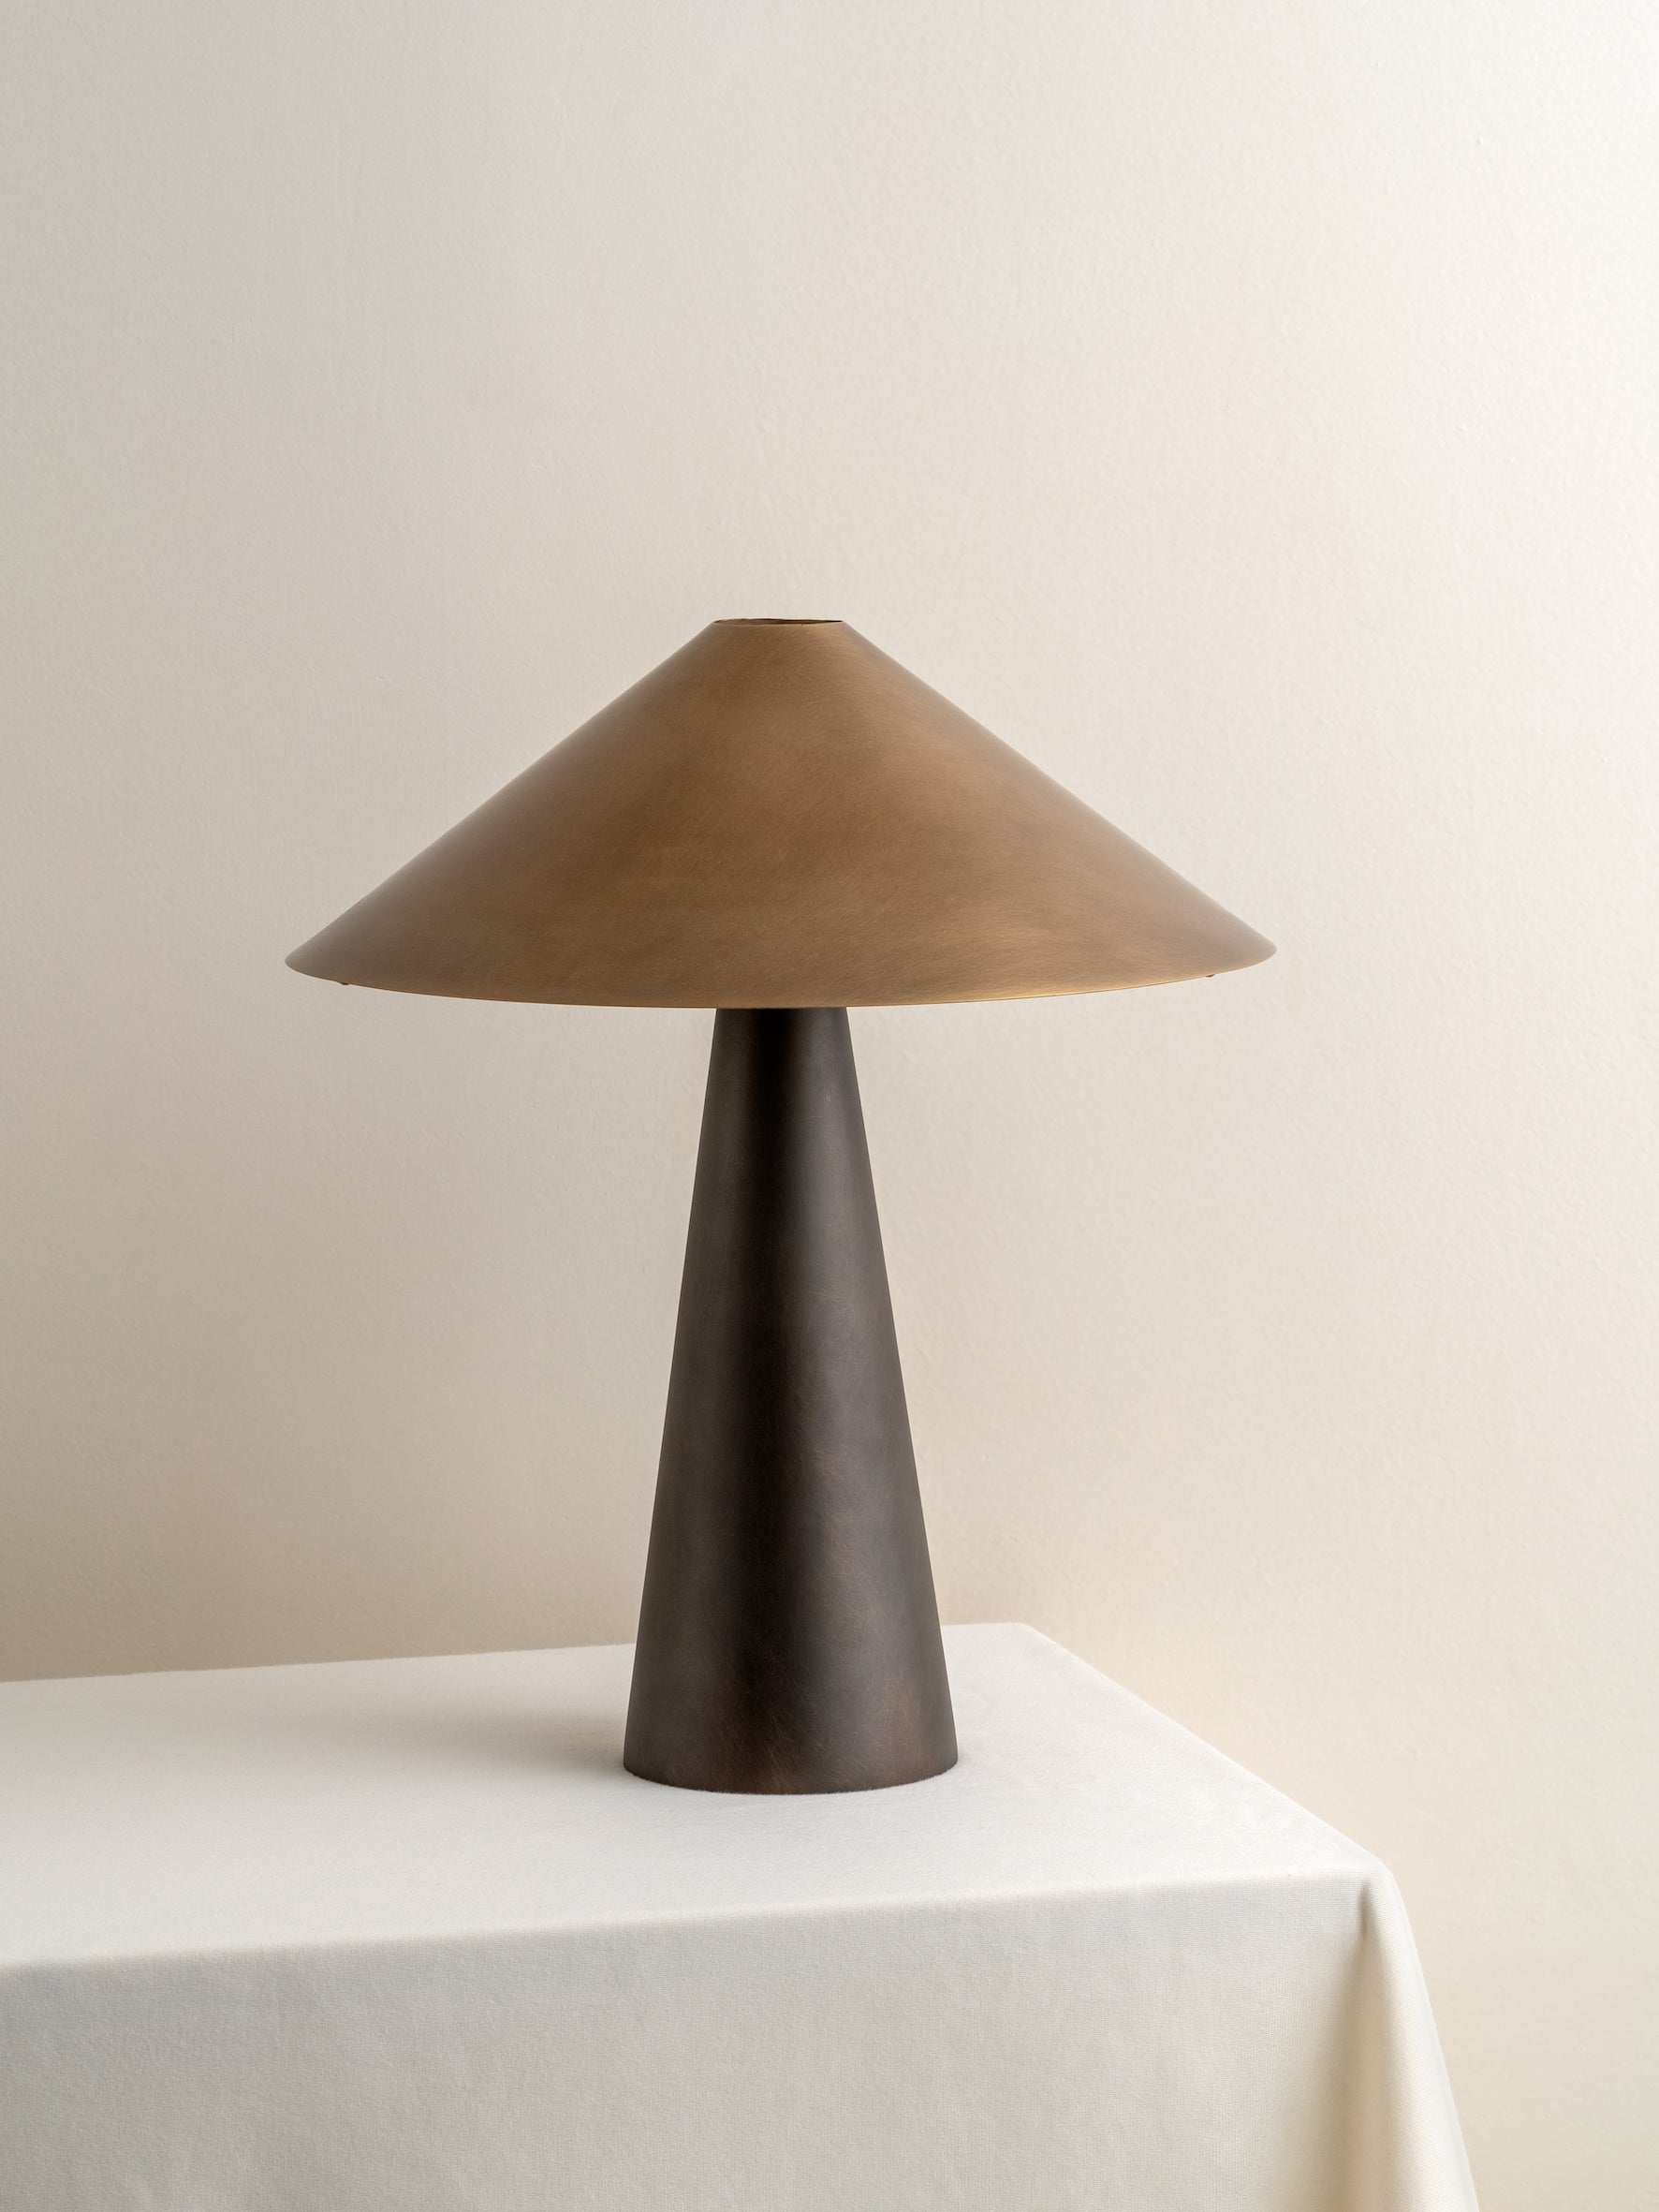 Orta - aged brass and bronze cone table lamp | Table Lamp | Lights & Lamps | UK | Modern Affordable Designer Lighting